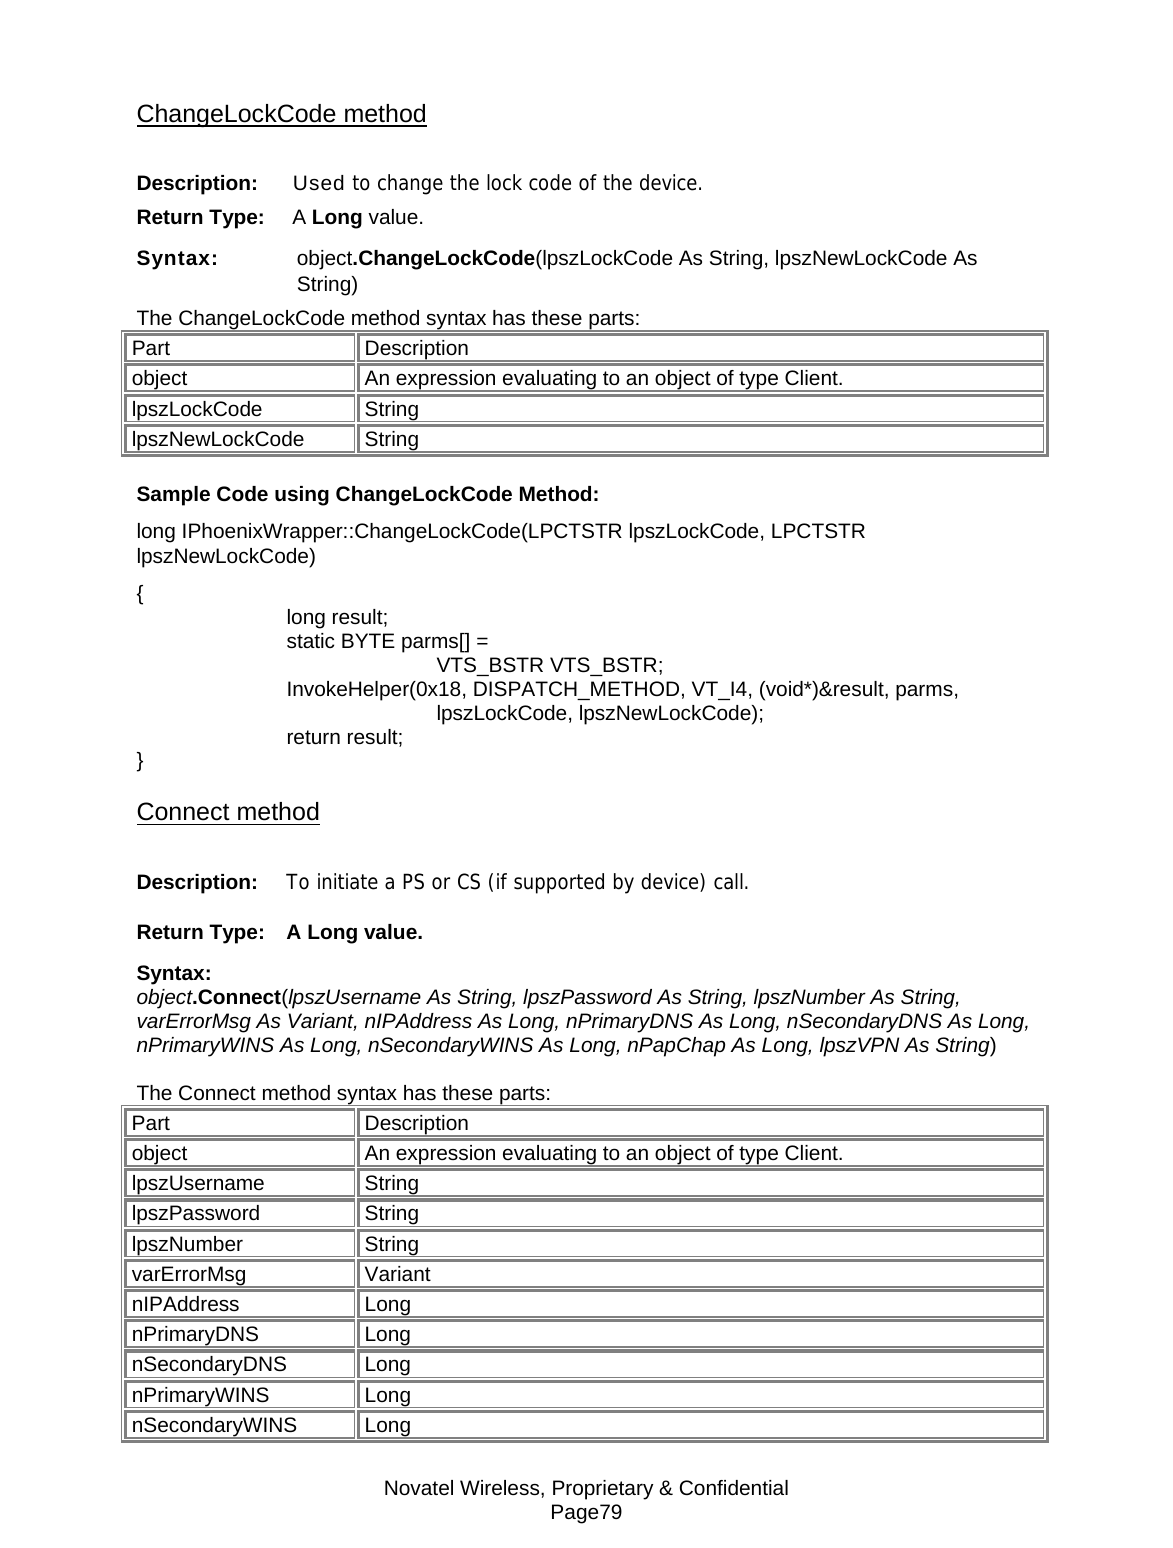 Novatel Wireless, Proprietary &amp; Confidential Page79 ChangeLockCode method Description:   Used to change the lock code of the device. Return Type:   A Long value. Syntax:    object.ChangeLockCode(lpszLockCode As String, lpszNewLockCode As String) The ChangeLockCode method syntax has these parts: Part Description object  An expression evaluating to an object of type Client. lpszLockCode String lpszNewLockCode String Sample Code using ChangeLockCode Method: long IPhoenixWrapper::ChangeLockCode(LPCTSTR lpszLockCode, LPCTSTR lpszNewLockCode) {  long result;   static BYTE parms[] =   VTS_BSTR VTS_BSTR;  InvokeHelper(0x18, DISPATCH_METHOD, VT_I4, (void*)&amp;result, parms,   lpszLockCode, lpszNewLockCode);  return result; } Connect method Description:  To initiate a PS or CS (if supported by device) call. Return Type: A Long value. Syntax:  object.Connect(lpszUsername As String, lpszPassword As String, lpszNumber As String, varErrorMsg As Variant, nIPAddress As Long, nPrimaryDNS As Long, nSecondaryDNS As Long, nPrimaryWINS As Long, nSecondaryWINS As Long, nPapChap As Long, lpszVPN As String)  The Connect method syntax has these parts: Part Description object  An expression evaluating to an object of type Client. lpszUsername String lpszPassword String lpszNumber String varErrorMsg Variant nIPAddress Long nPrimaryDNS Long nSecondaryDNS Long nPrimaryWINS Long nSecondaryWINS Long 